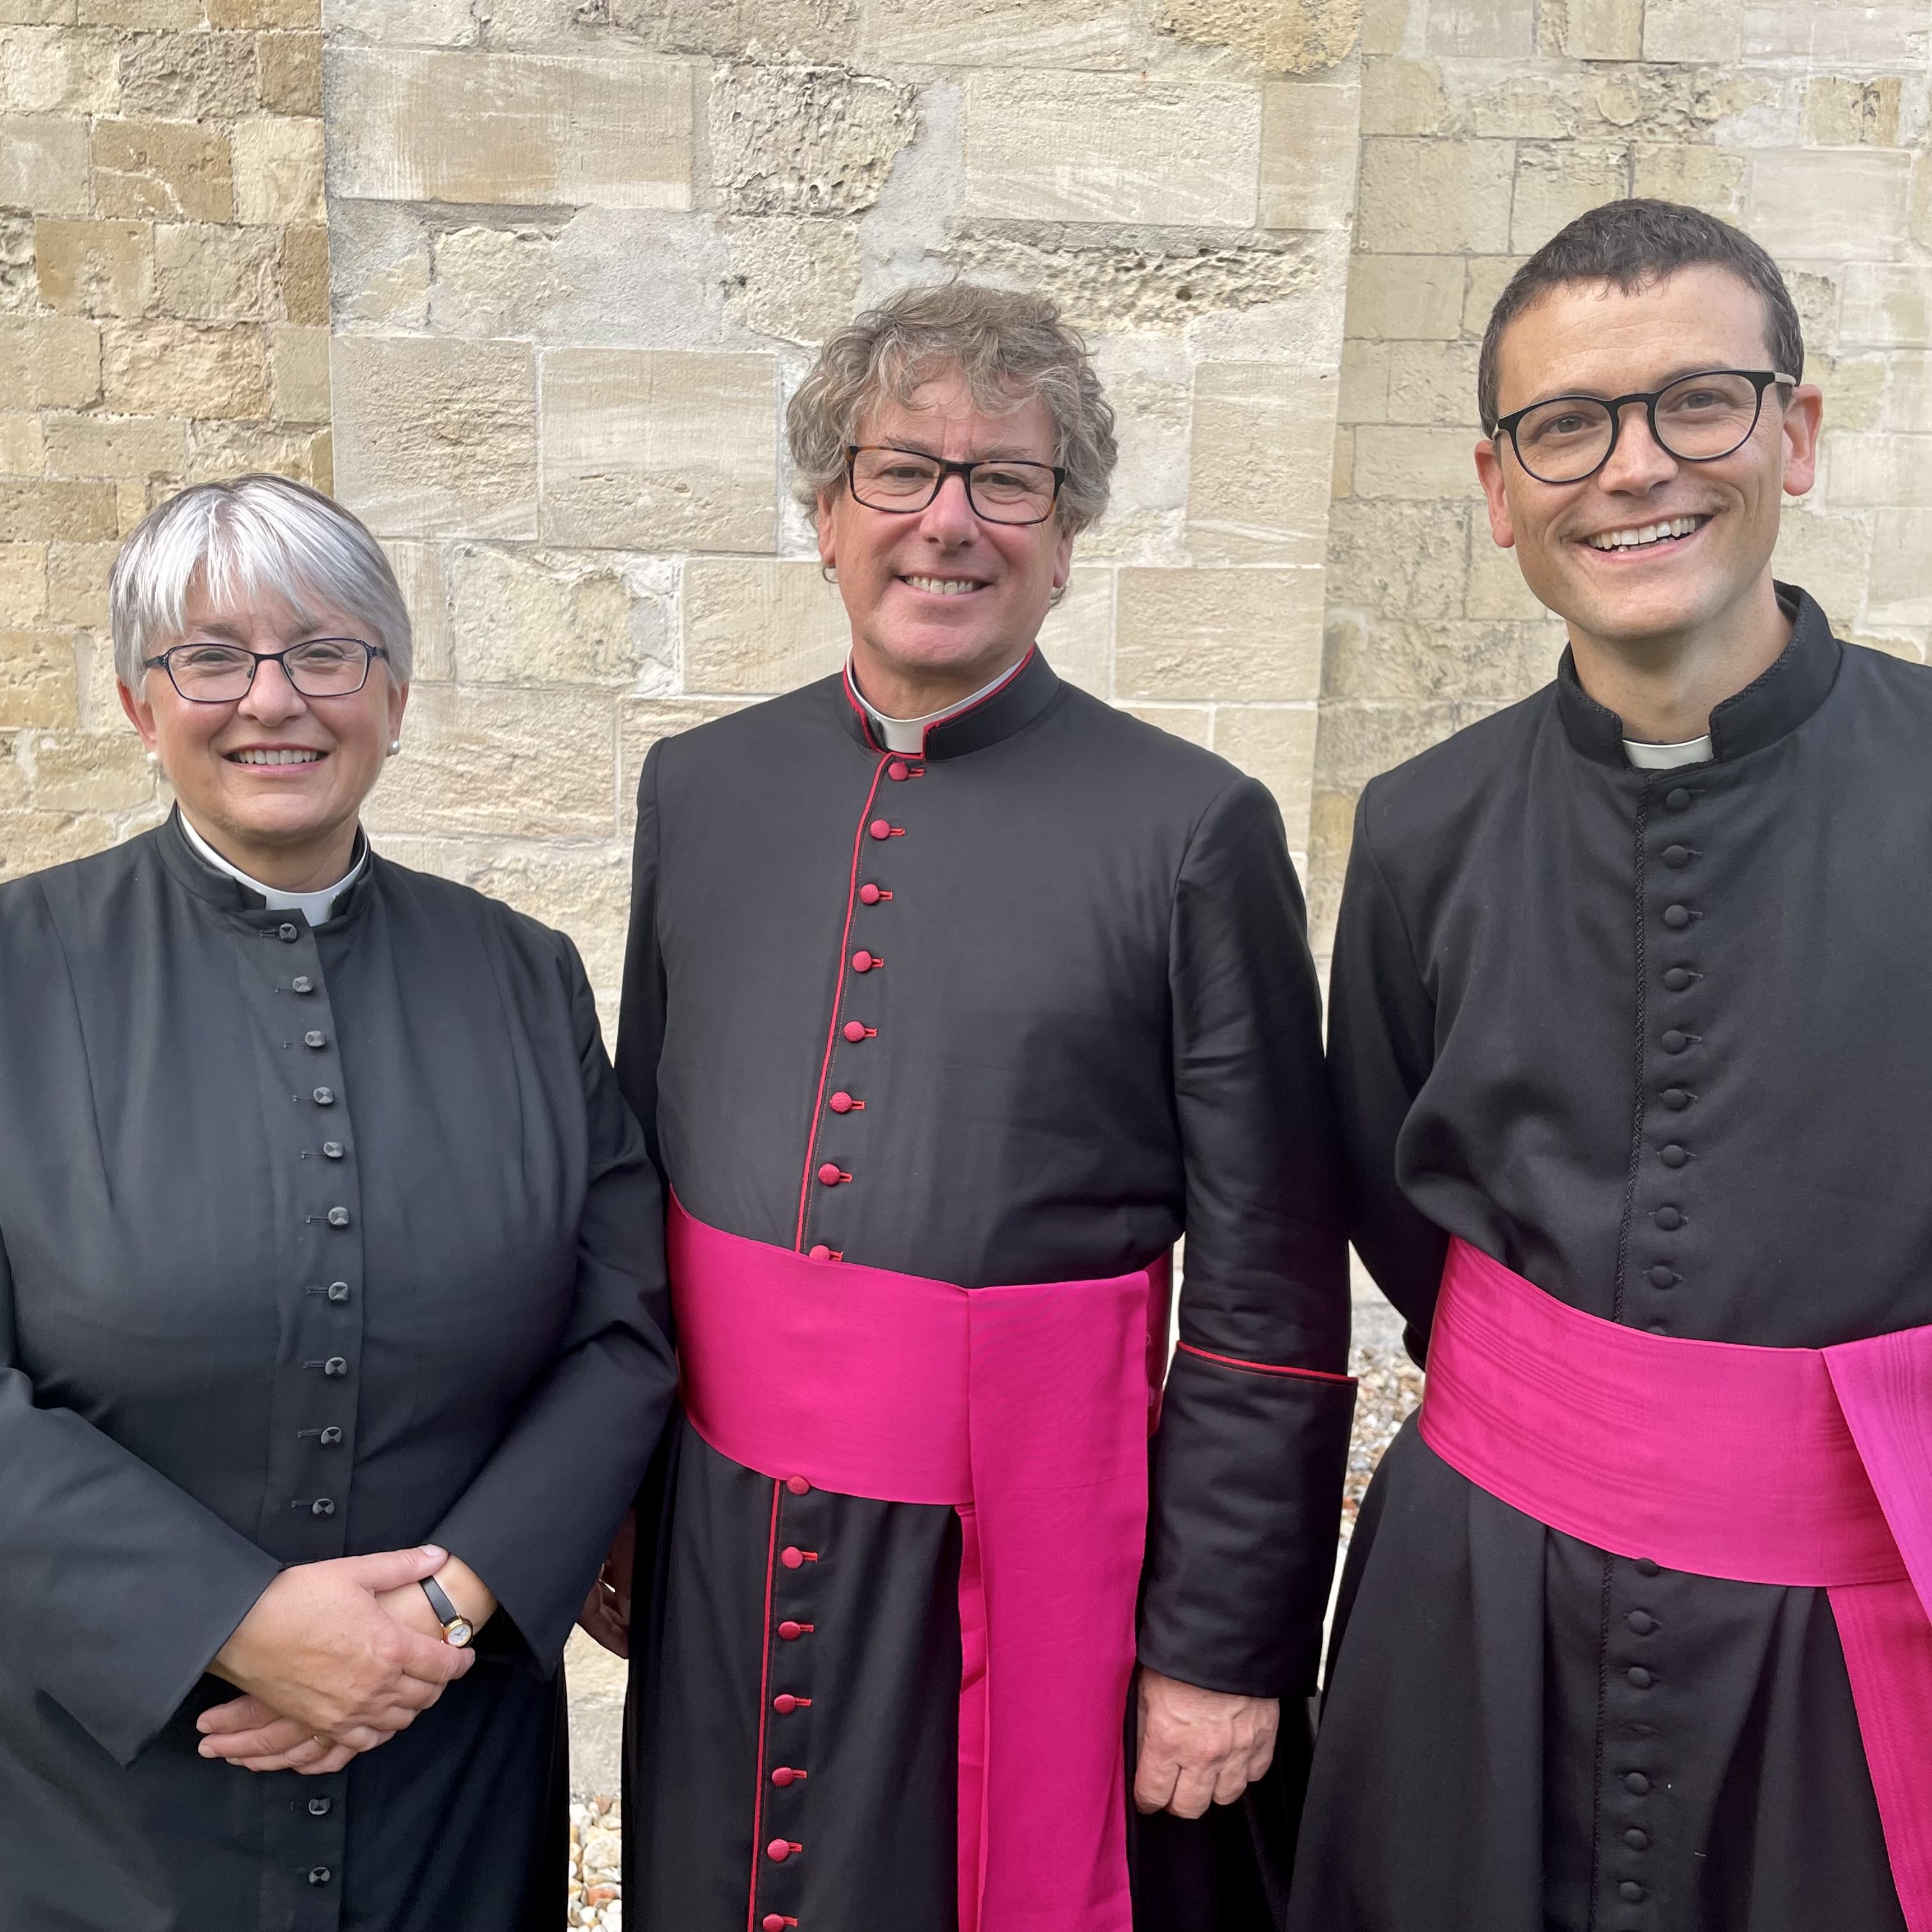 The Dean of Chichester stands alongside two new Canons, wearing black